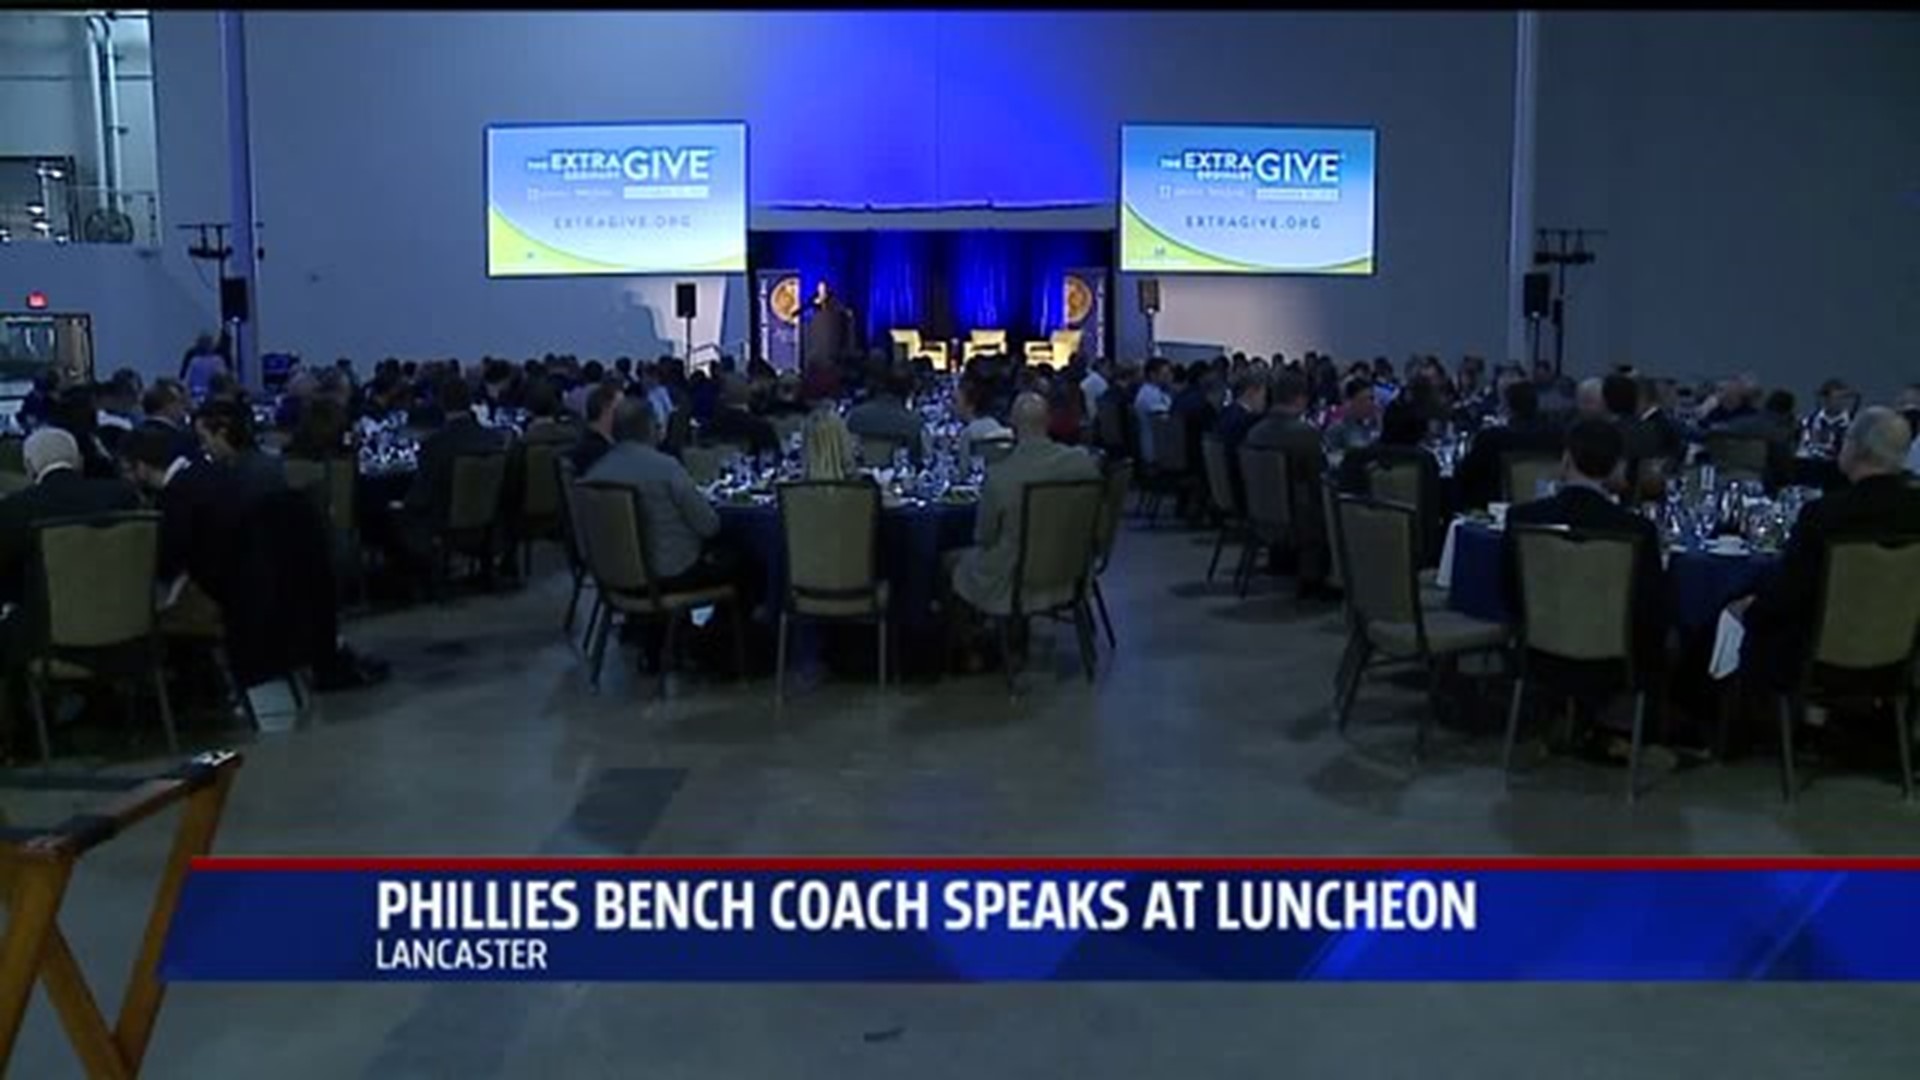 Phillies coach speaks on importance of giving